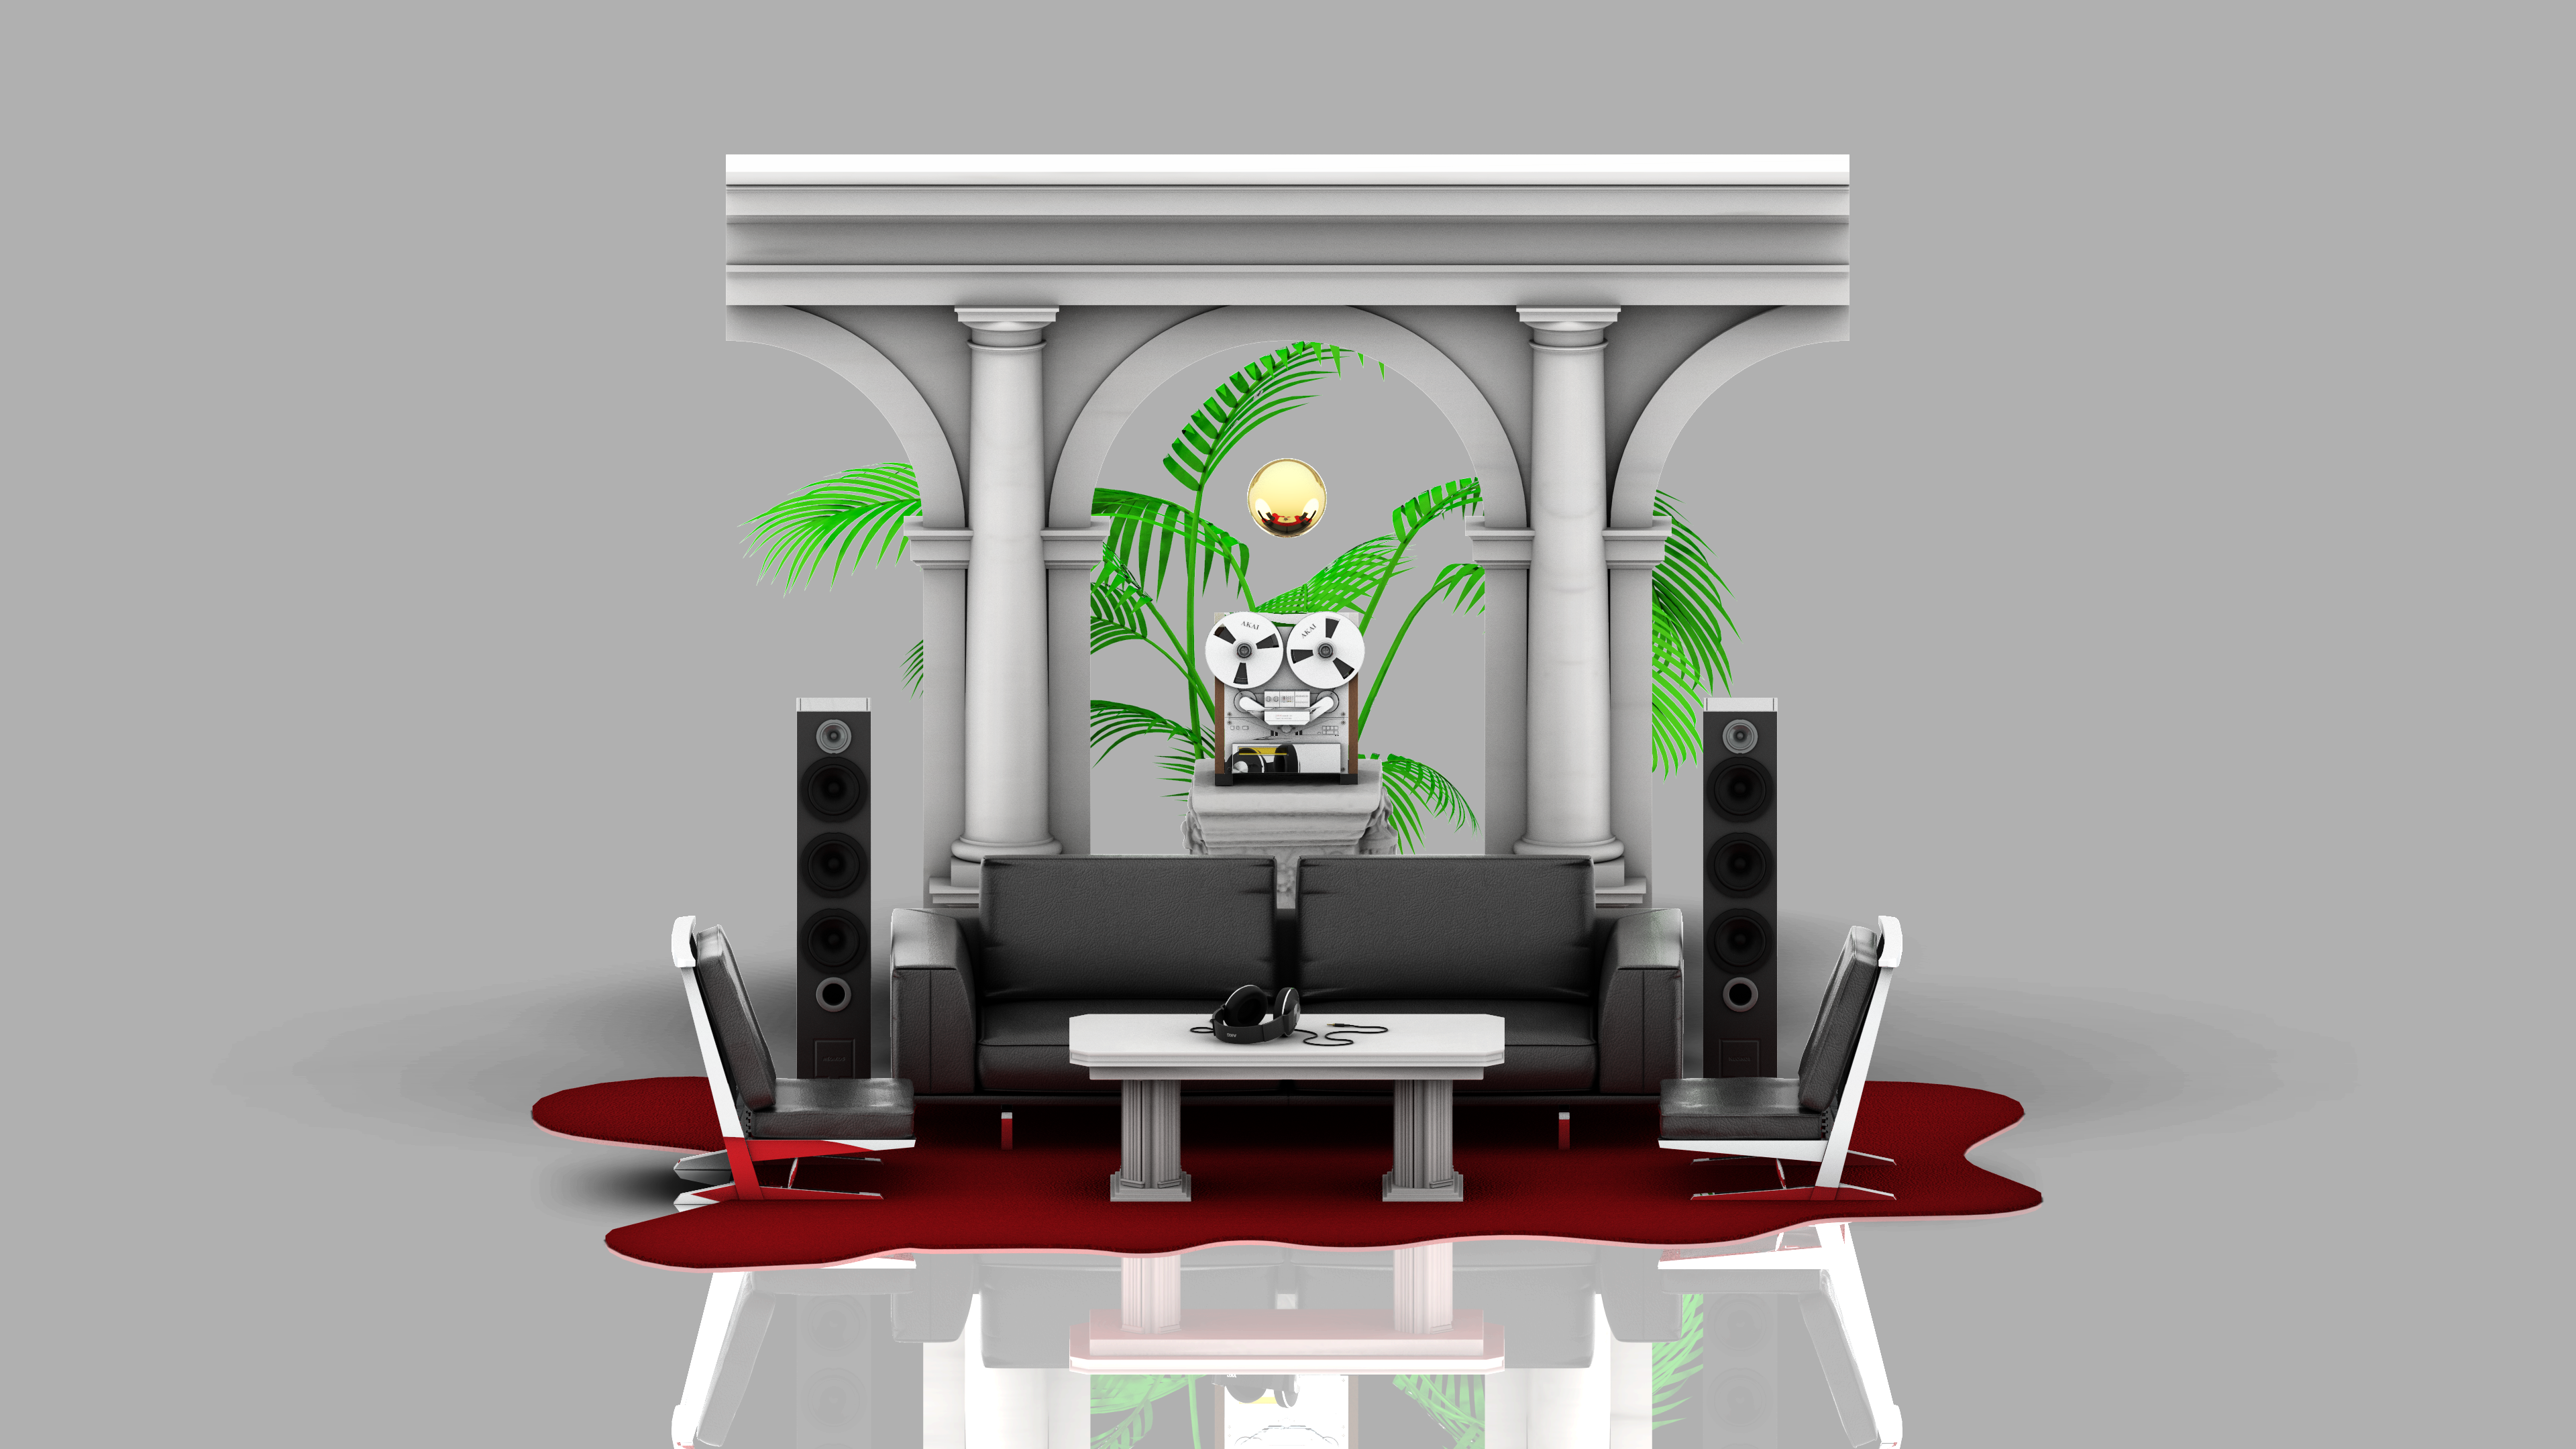 General 3840x2160 CGI graphic design room Architecture models carpet marble plants couch music speakers tape recorder gold digital art simple background reflection